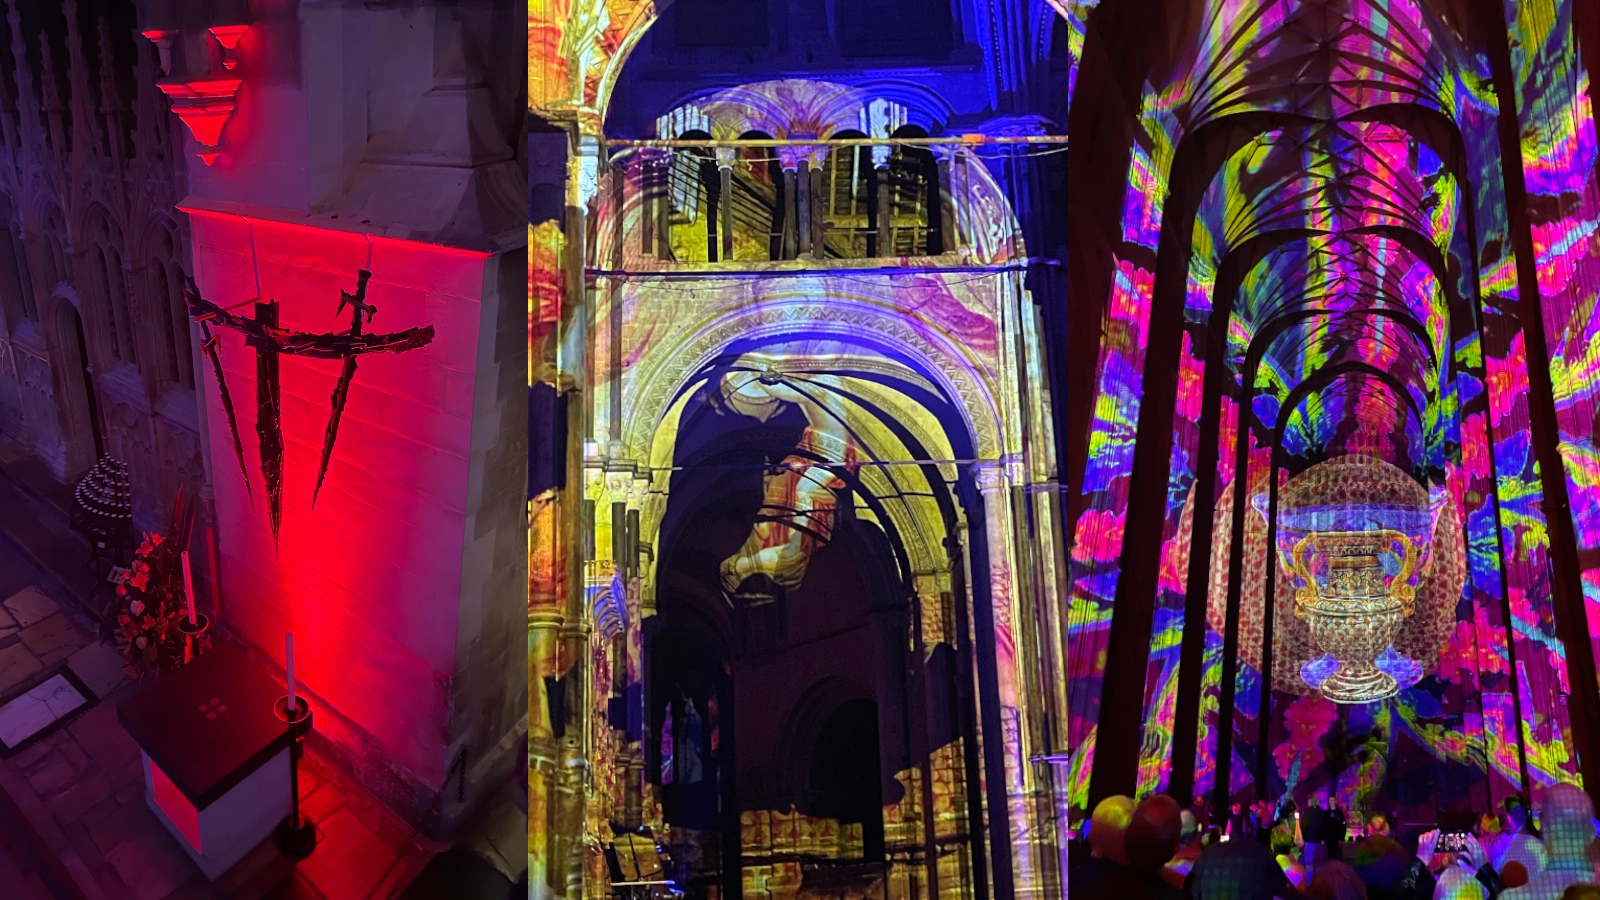 Canterbury Cathedral montage  Thomas Becket memorial alter, high alter and central knave - Luxmuralis light projection